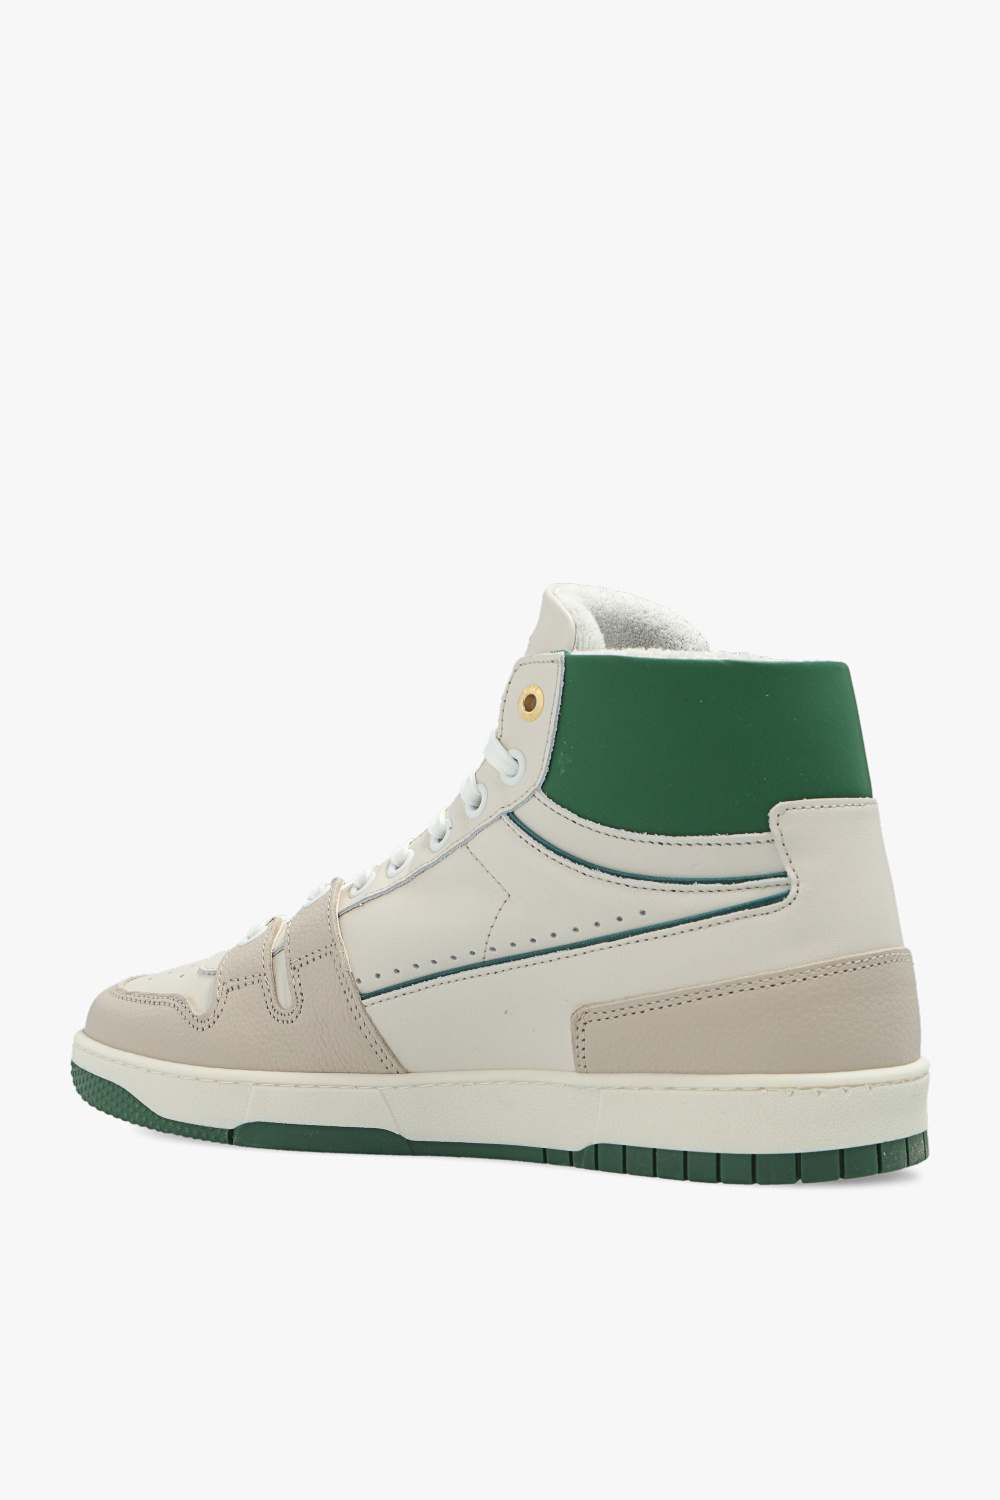 Mercer Amsterdam THE BROOKLYN HIGH White / Green - Free delivery